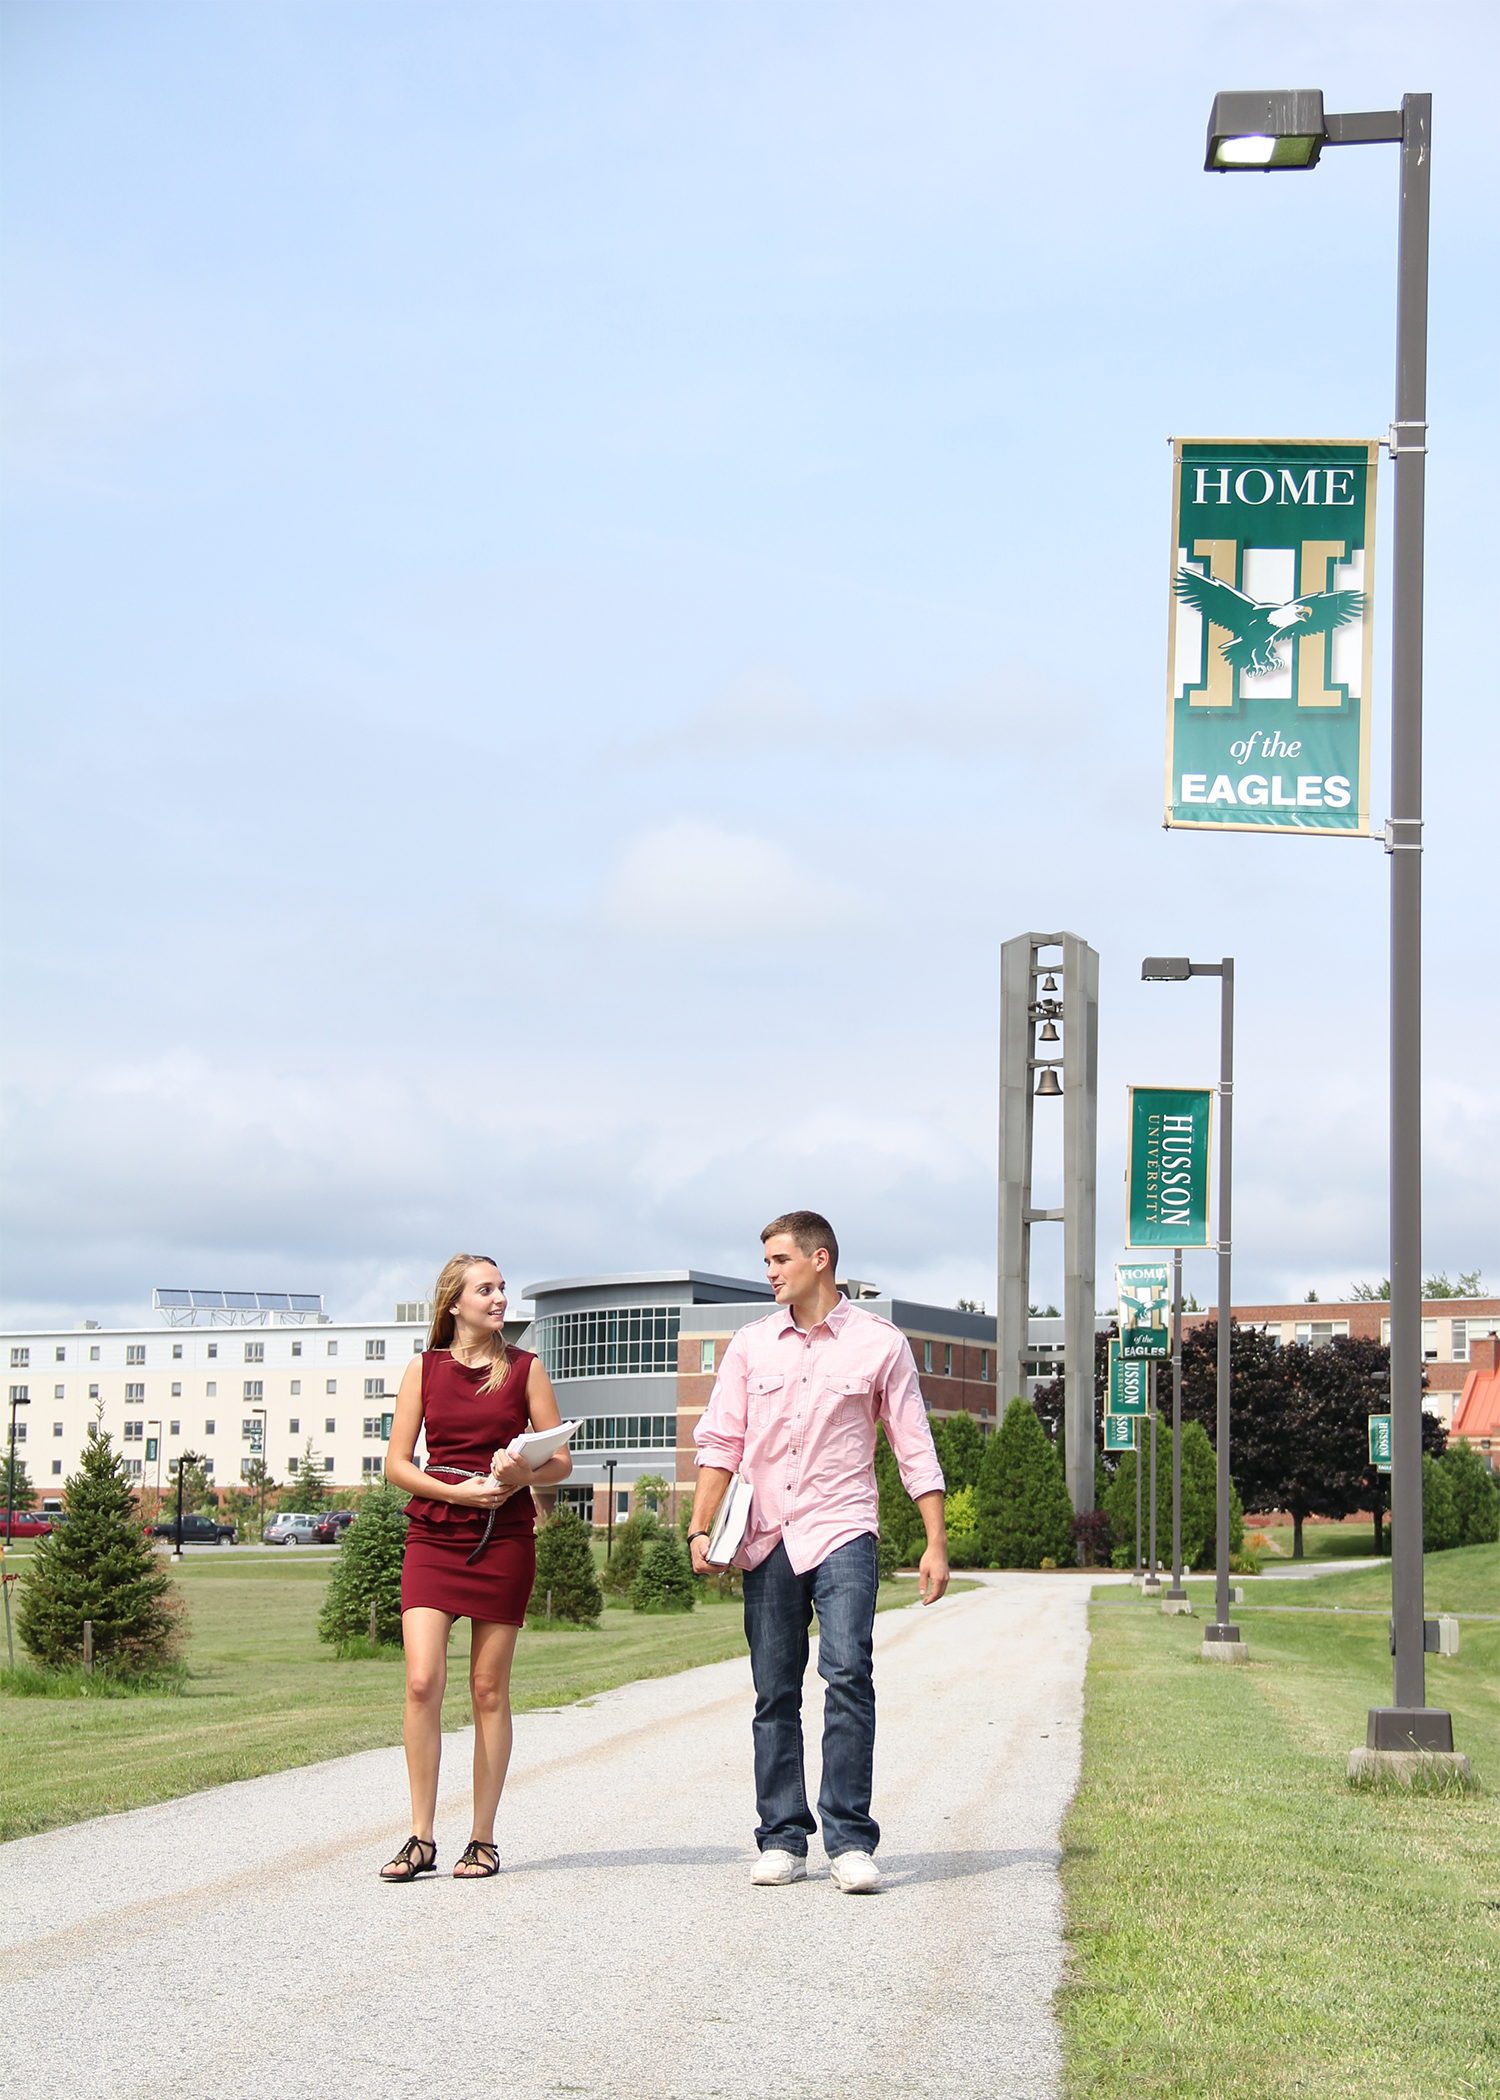 The campus of Husson University in Bangor, Maine.